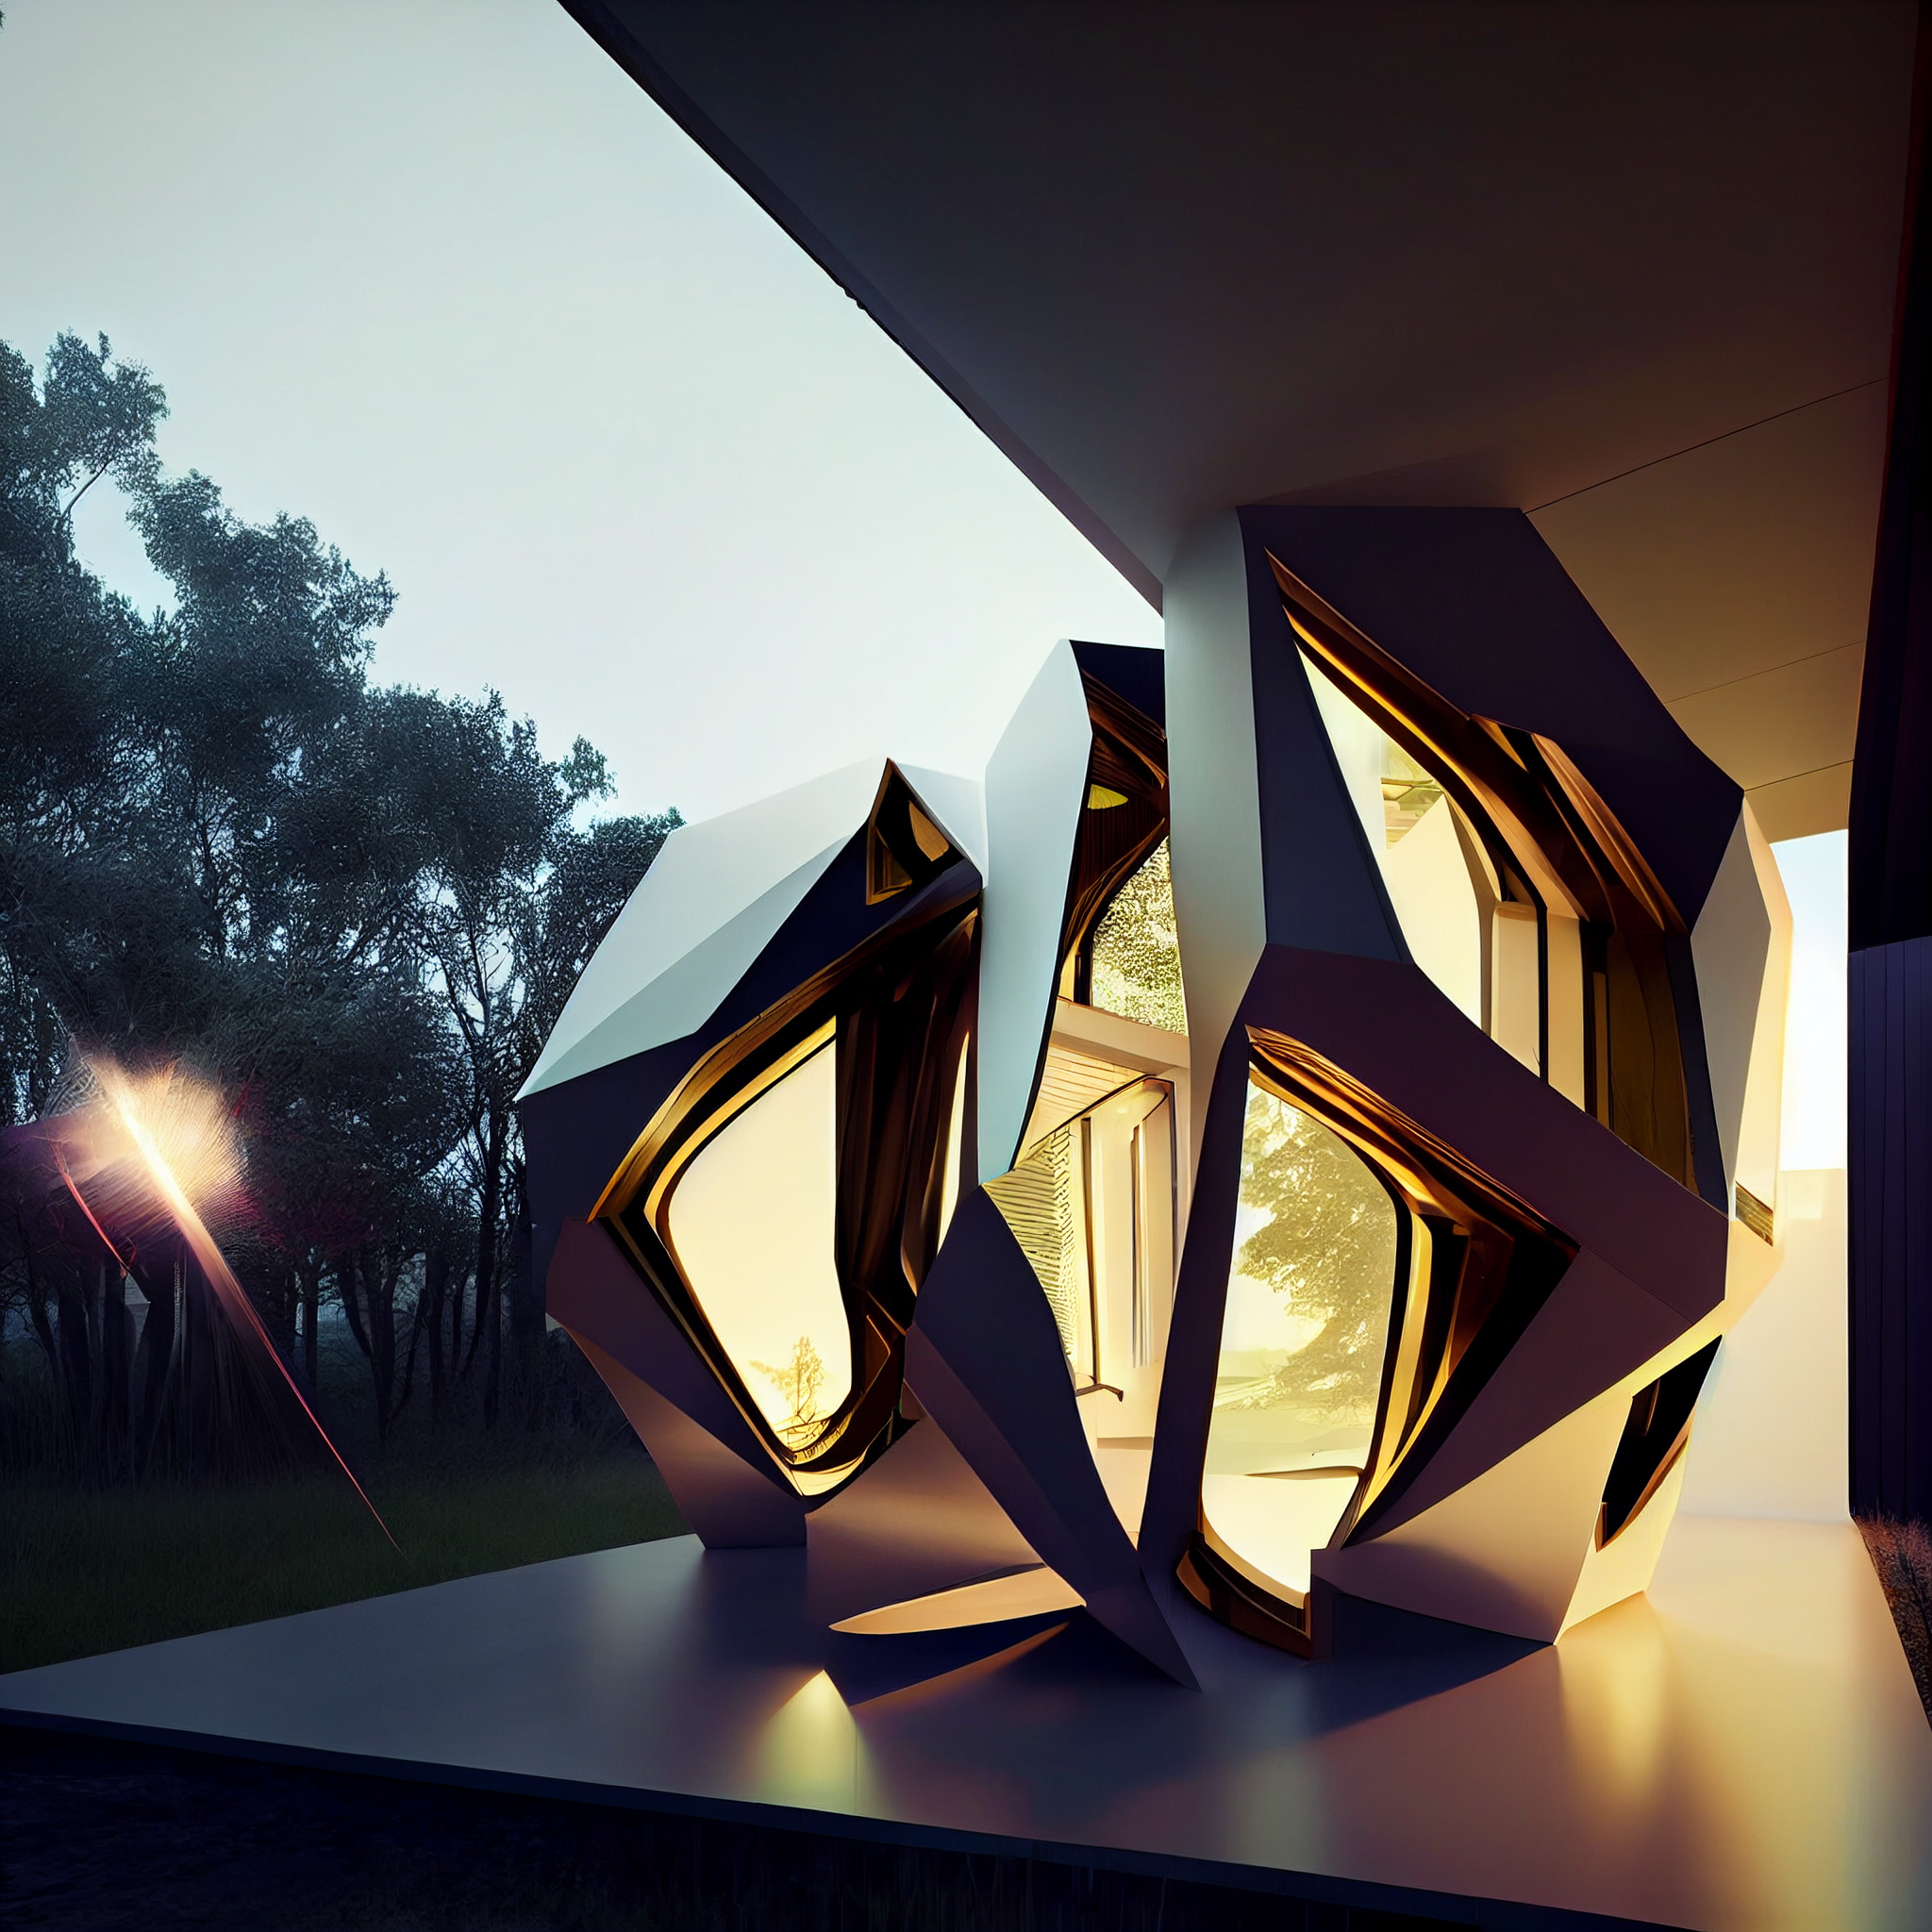 aaronalden_exterior_of_modern_home_designed_by_zaha_hadid_fract_2547e14f-db01-4c73-bc4c-a8f986a7a908.png